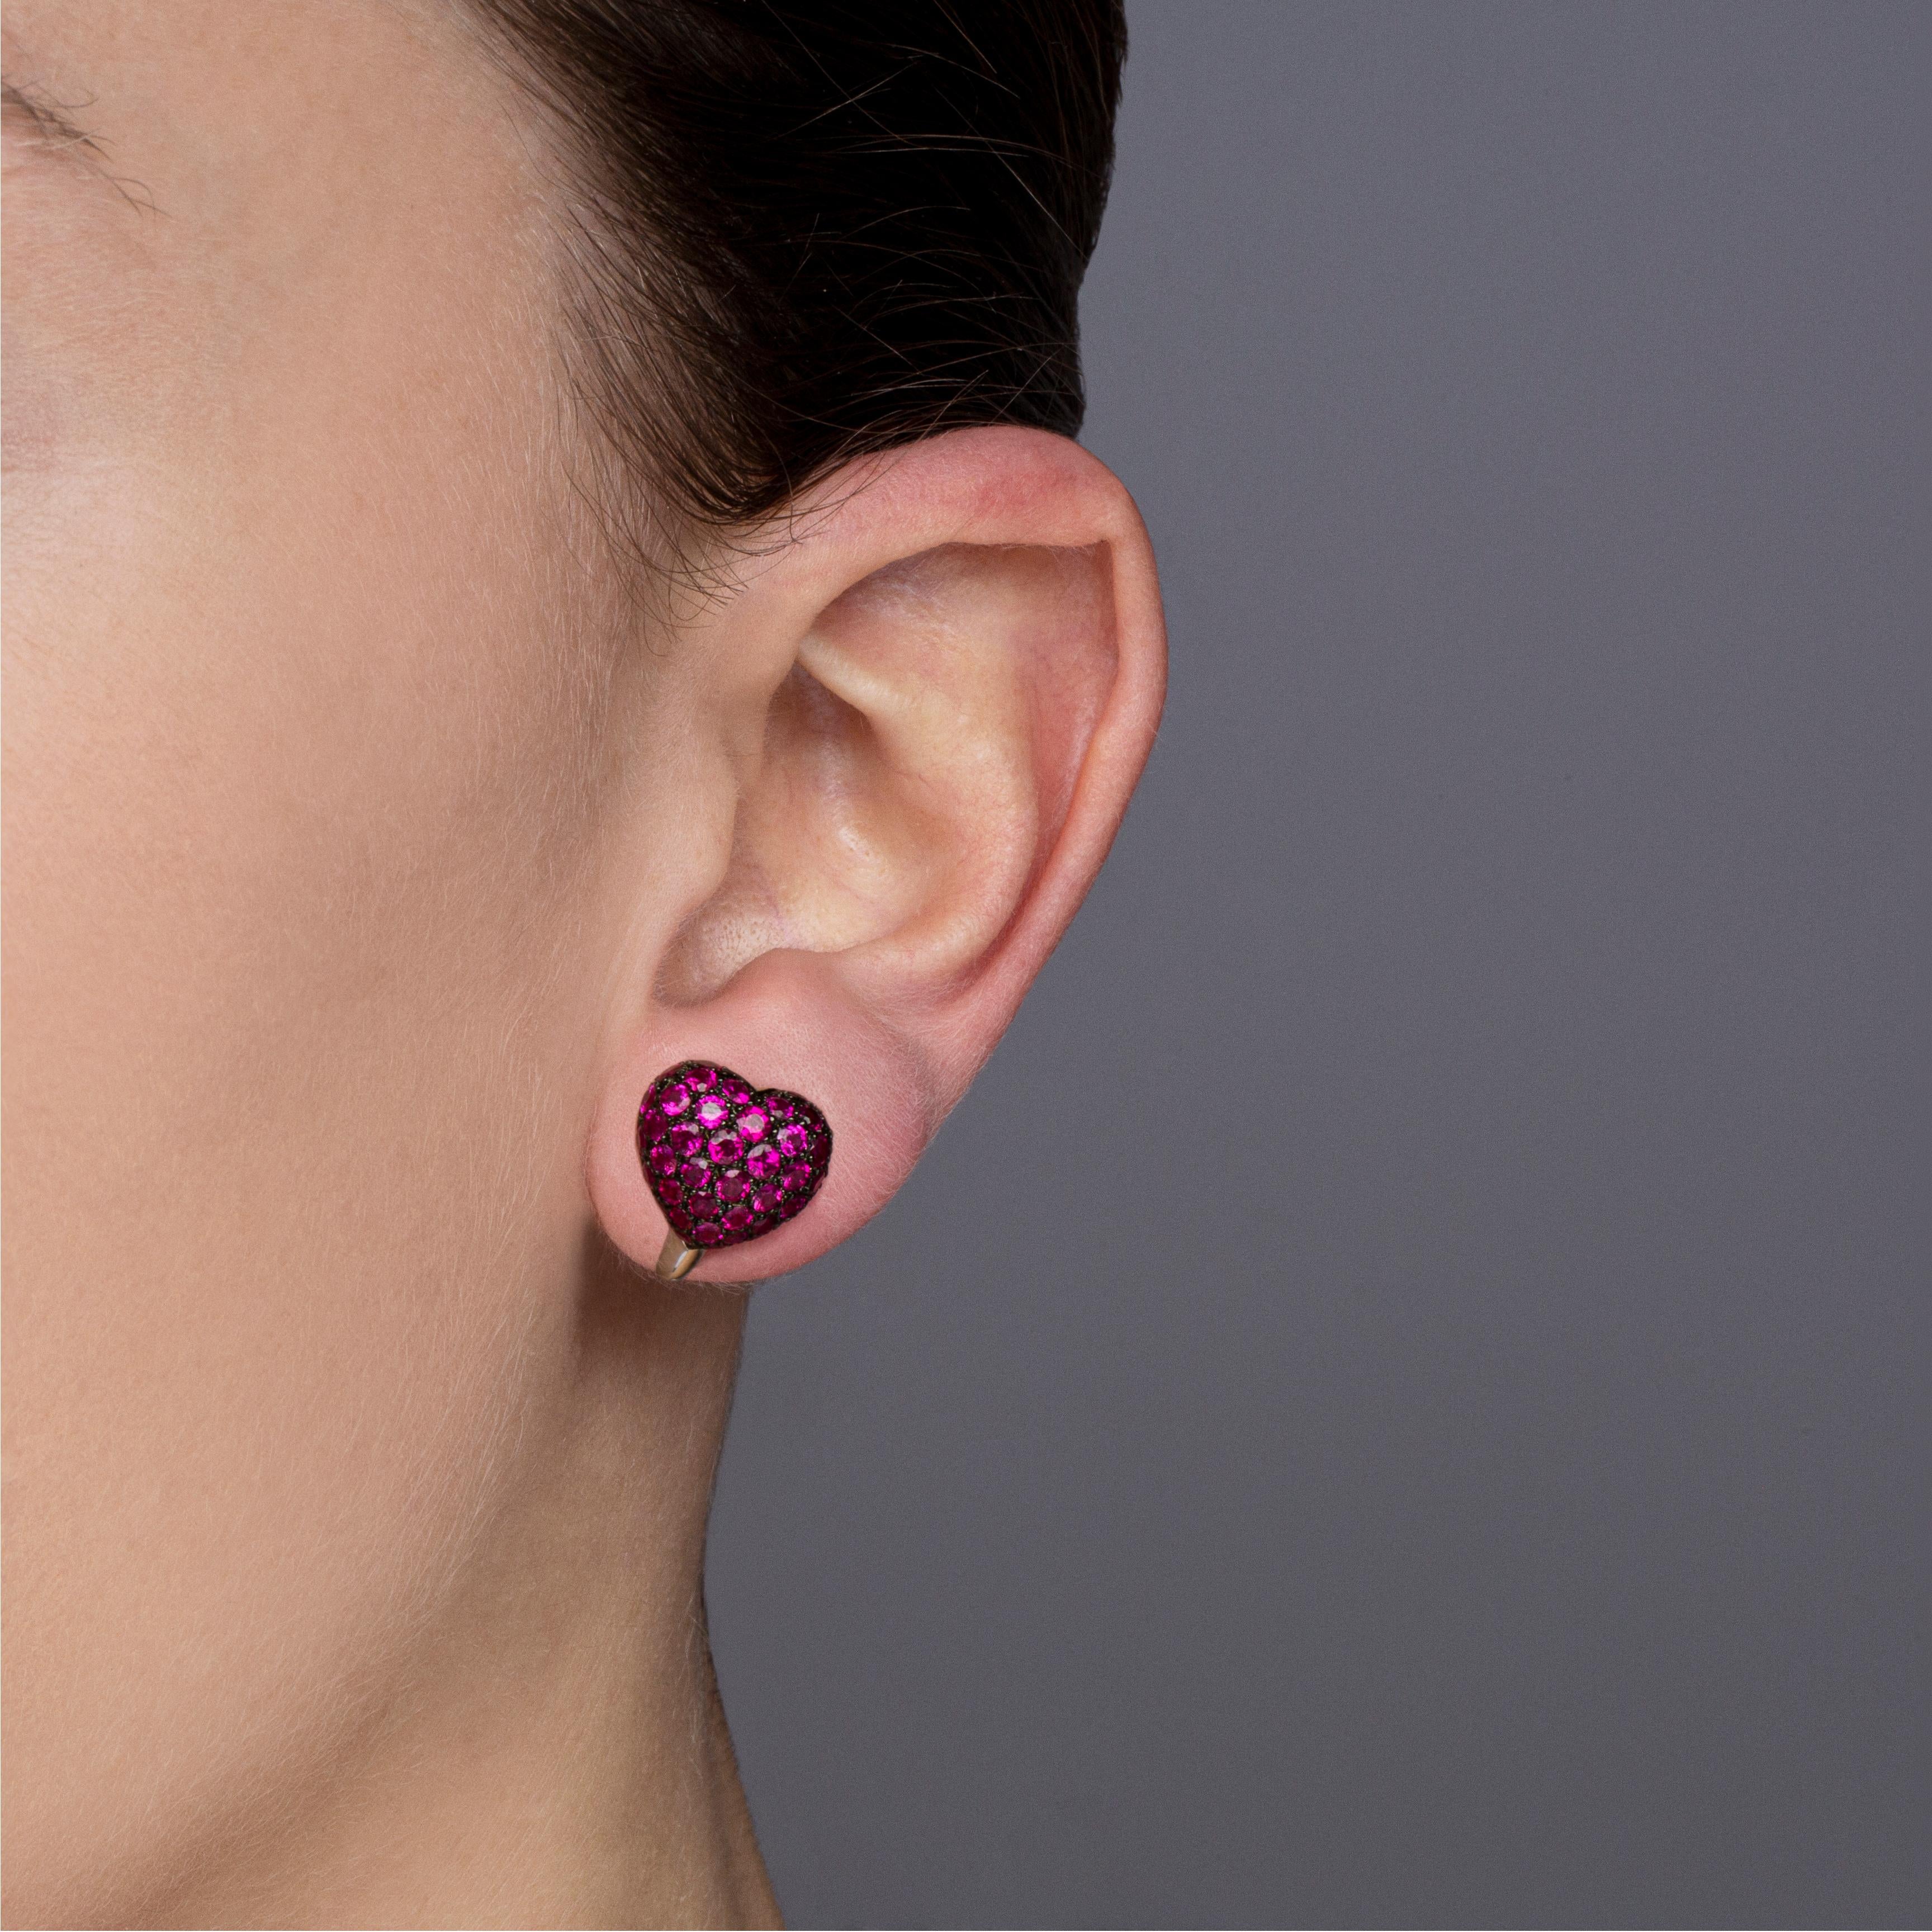 Jona design collection, hand crafted in Italy, 18 karat white gold, bombé heart  clip-on earrings, set with 3.53 carats of Burmese Rubies, with dark rhodium setting.  
Dimensions : H 0.55 in x W 0.50 in x D 0.27 in - H 13.97 mm x W 12.7 mm X D 6.8